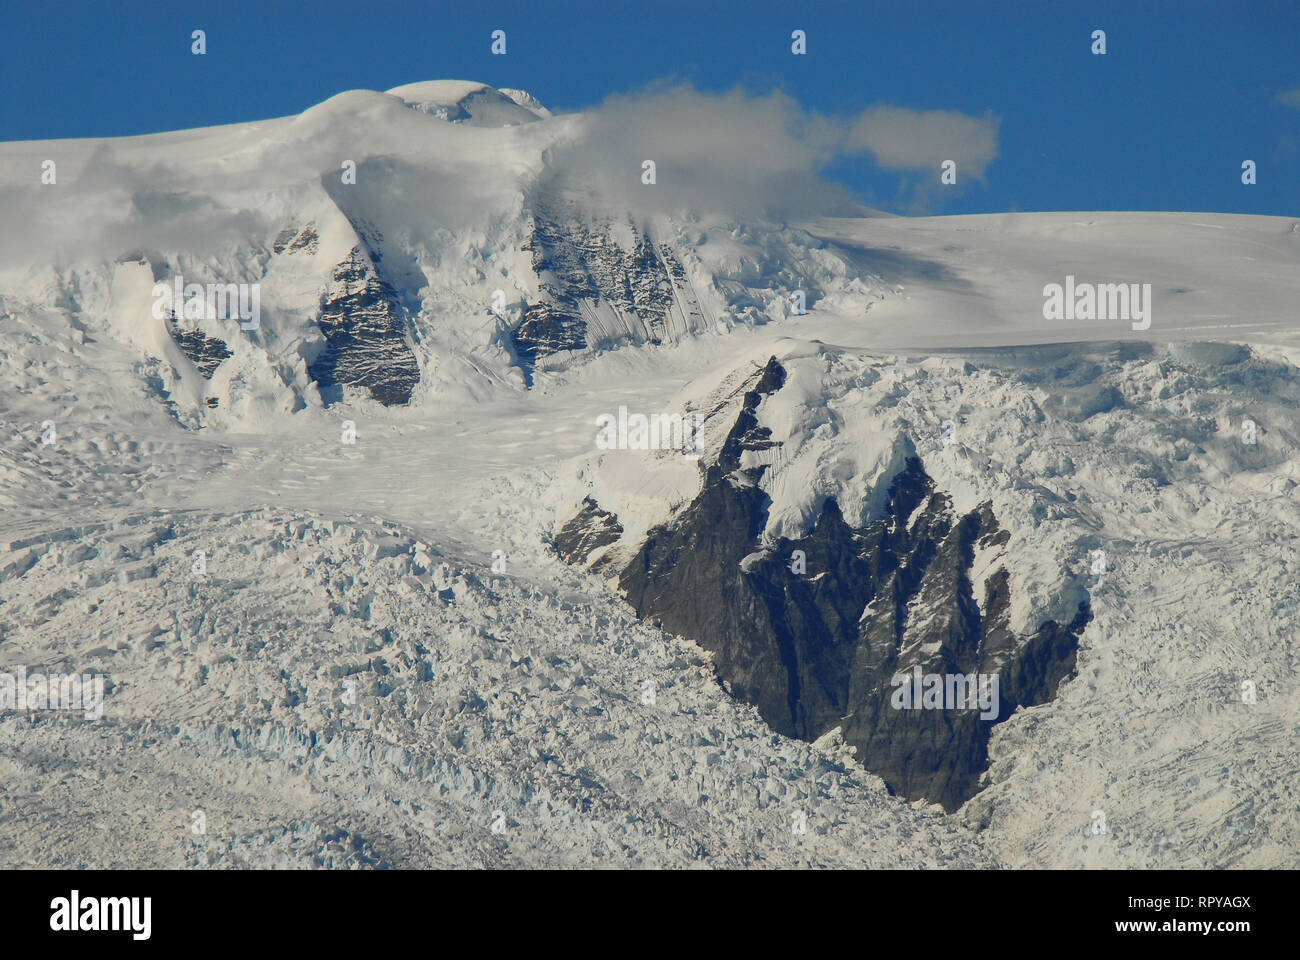 Snow covered mountain tops, which are well over 15,000 feet high, in the Wrangell St. Elias National Park, Alaska, USA. Stock Photo